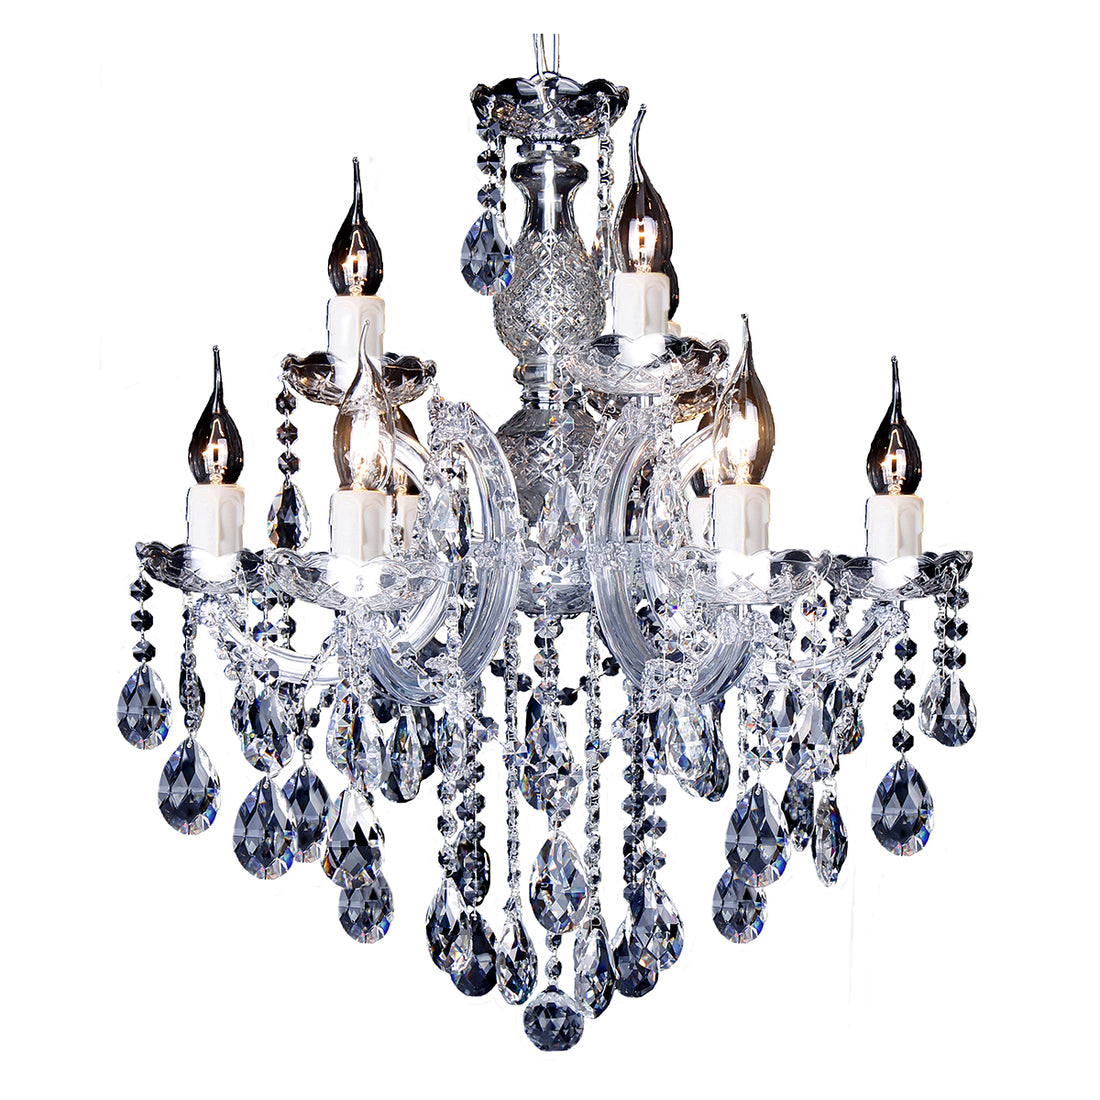 Zurich 9 Light Chrome Crystal Traditional Pendant Chandelier